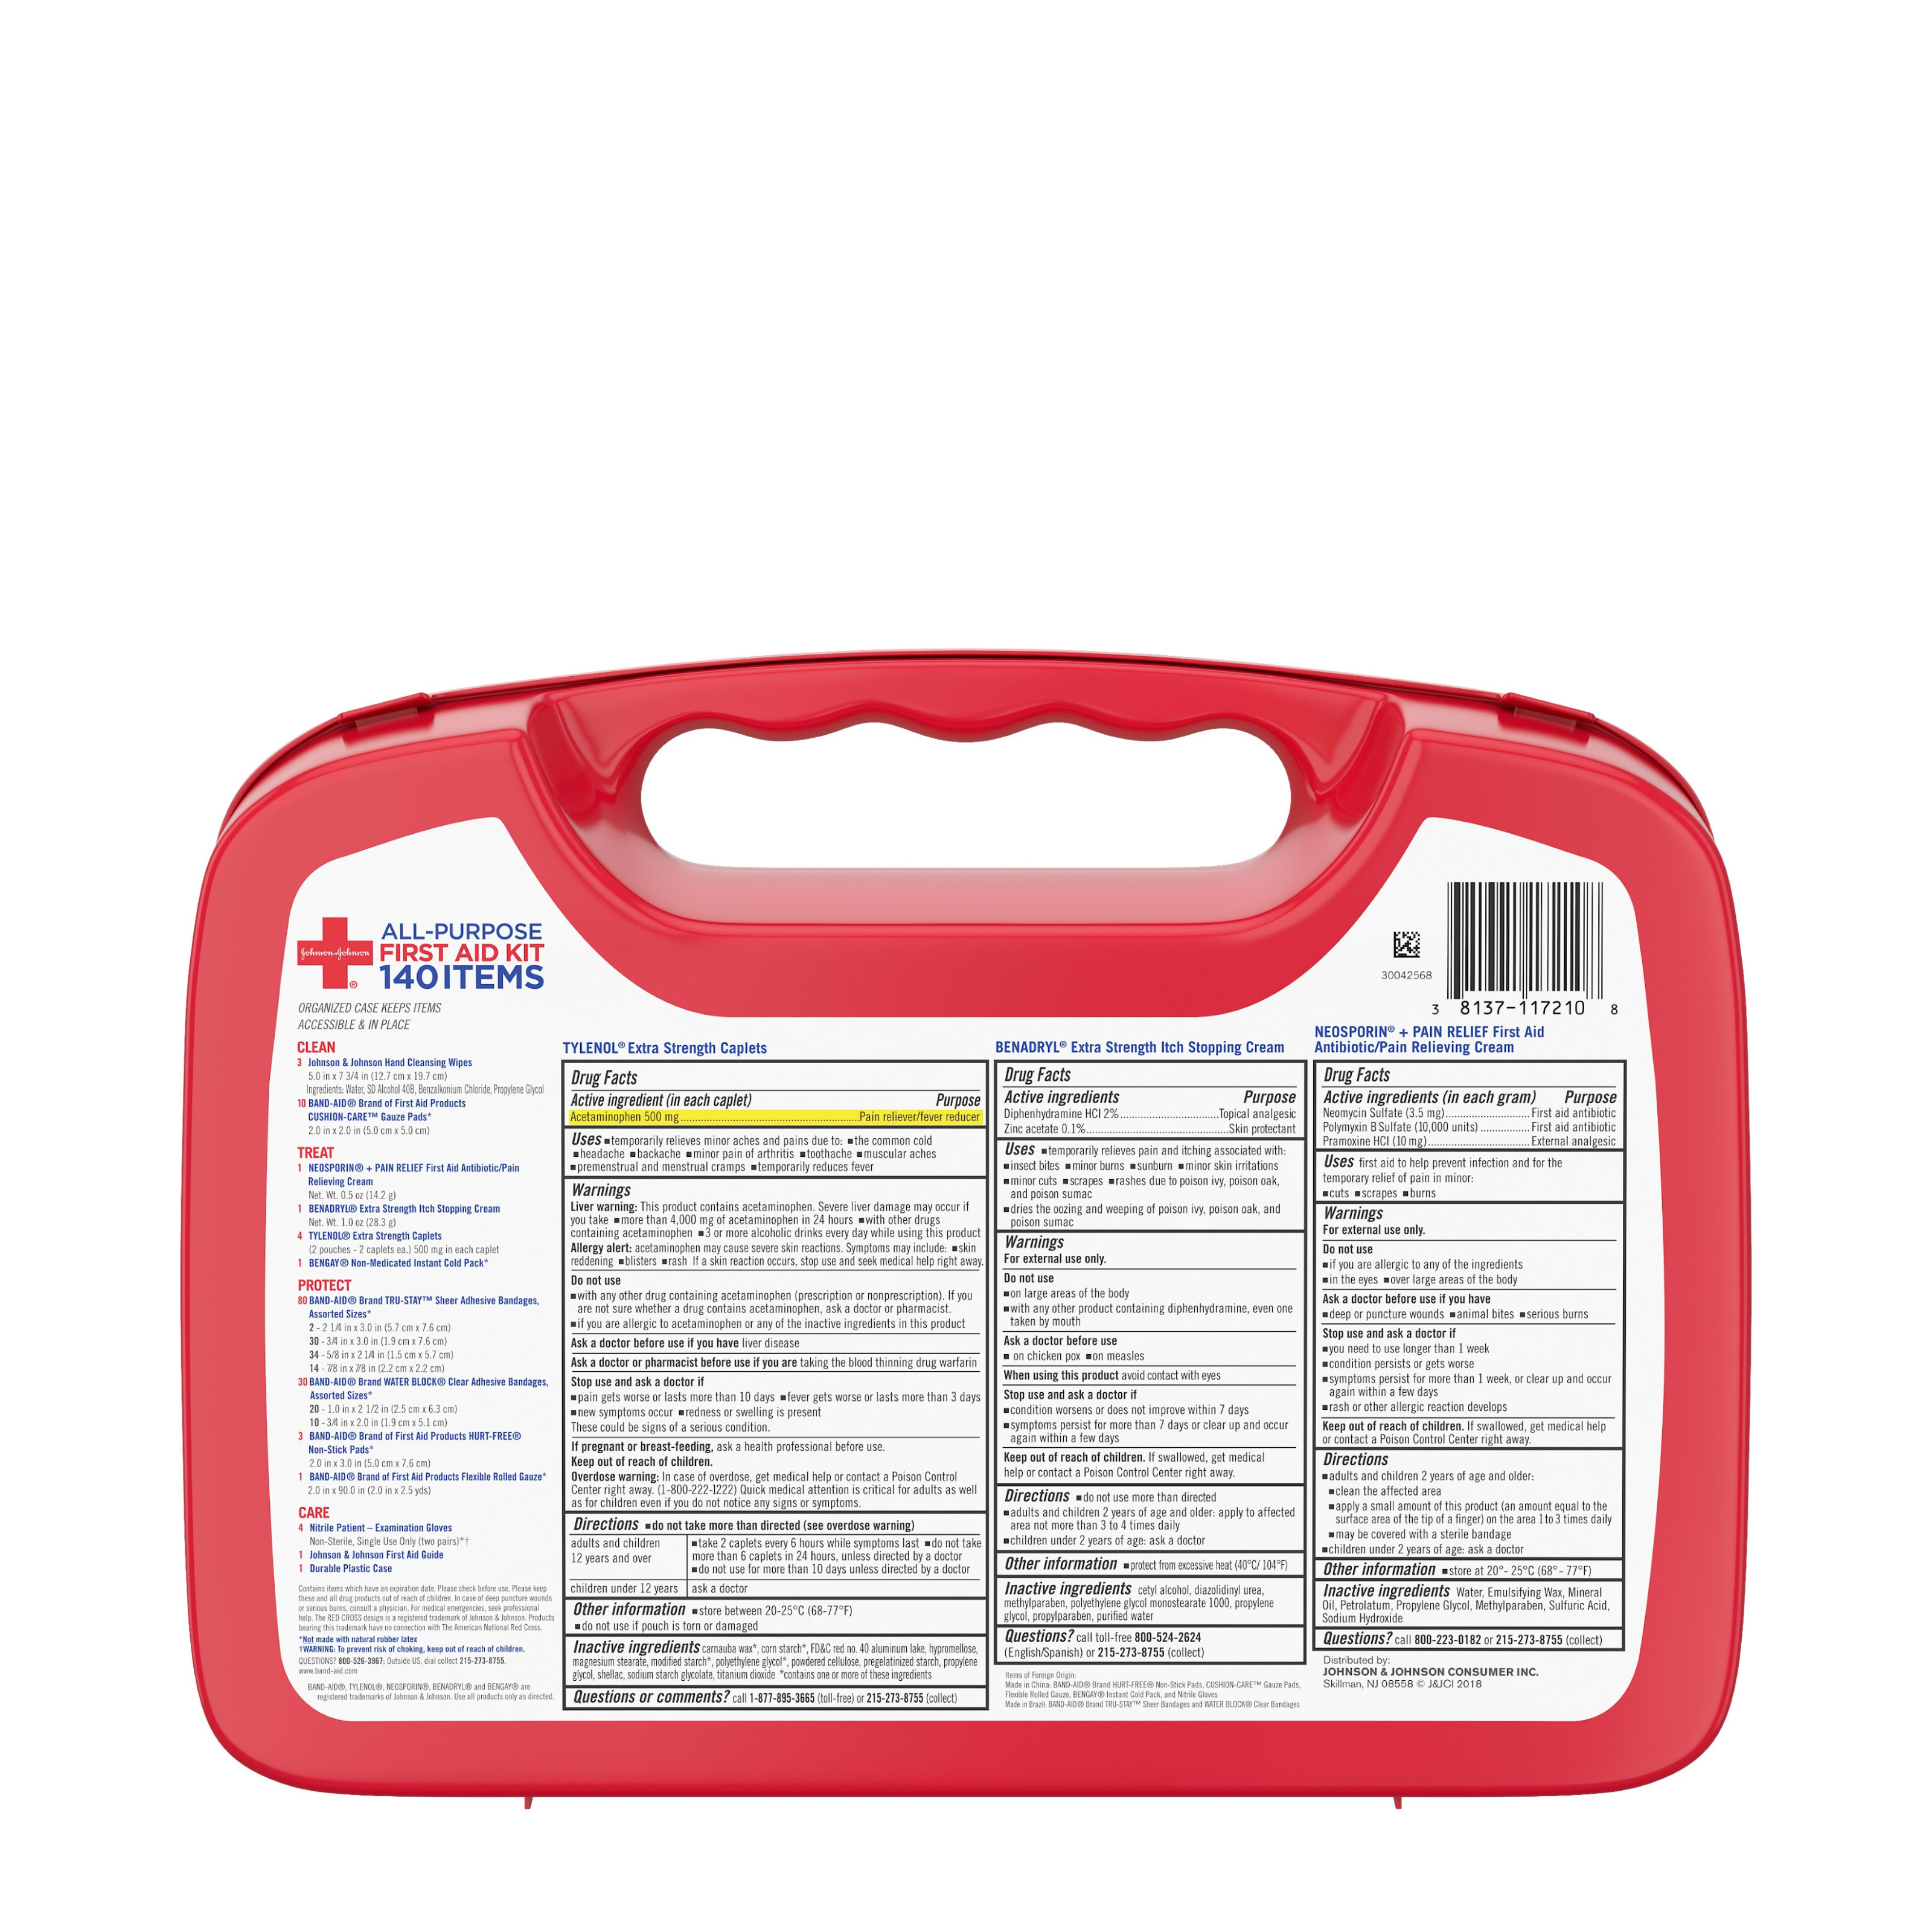 Johnson & Johnson All-Purpose Portable Compact First Aid Kit, 140 pc - image 5 of 14